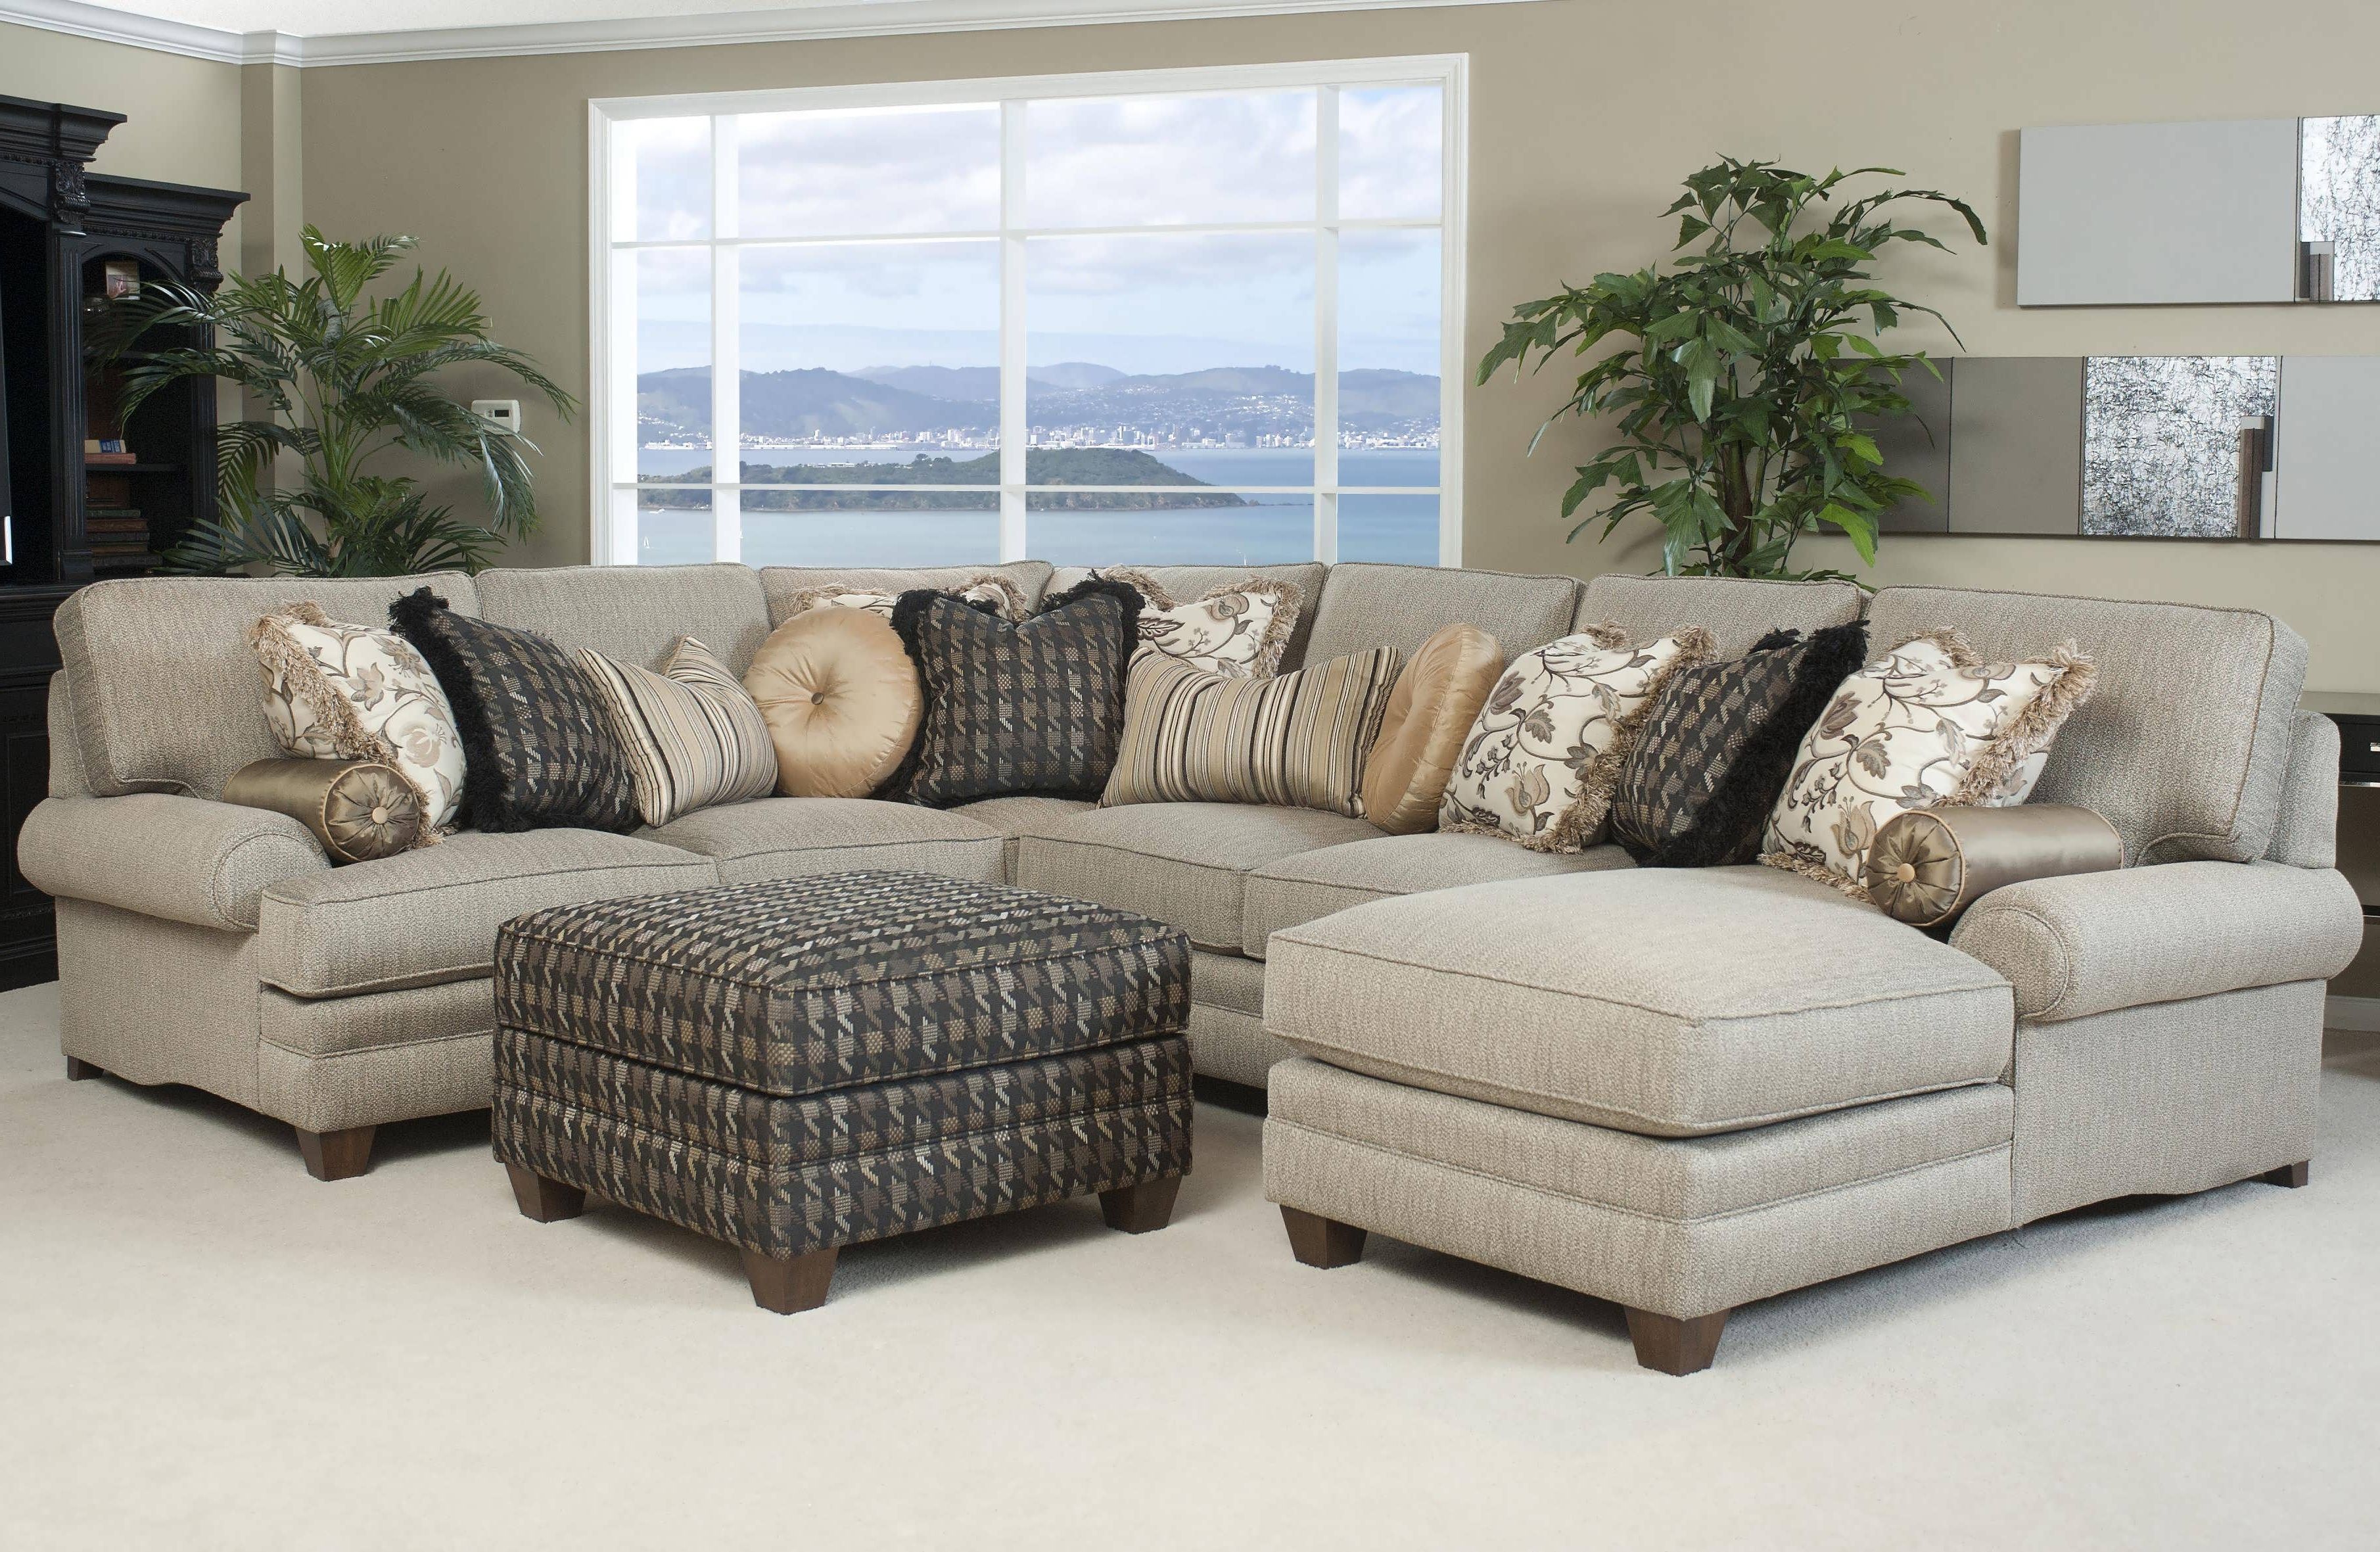 2018 Sofa : Couches L Sofa Microfiber Sectional White Sectional Small Intended For Chaise Lounge Sectionals (Photo 15 of 15)